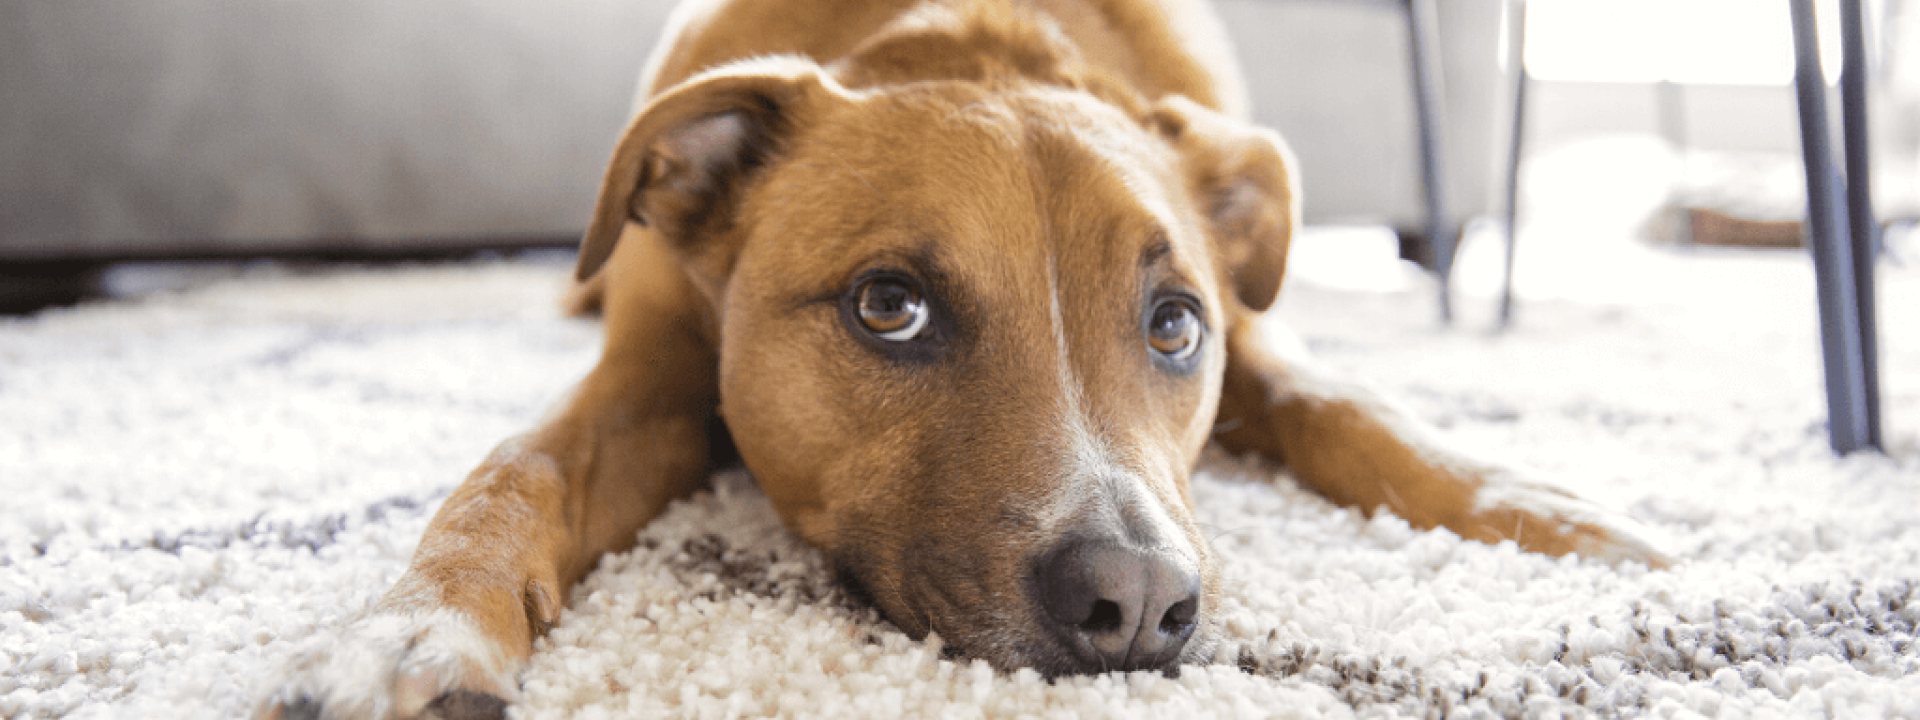 Shepherd mix puppy dog makes funny face lying on shag rug carpet at home